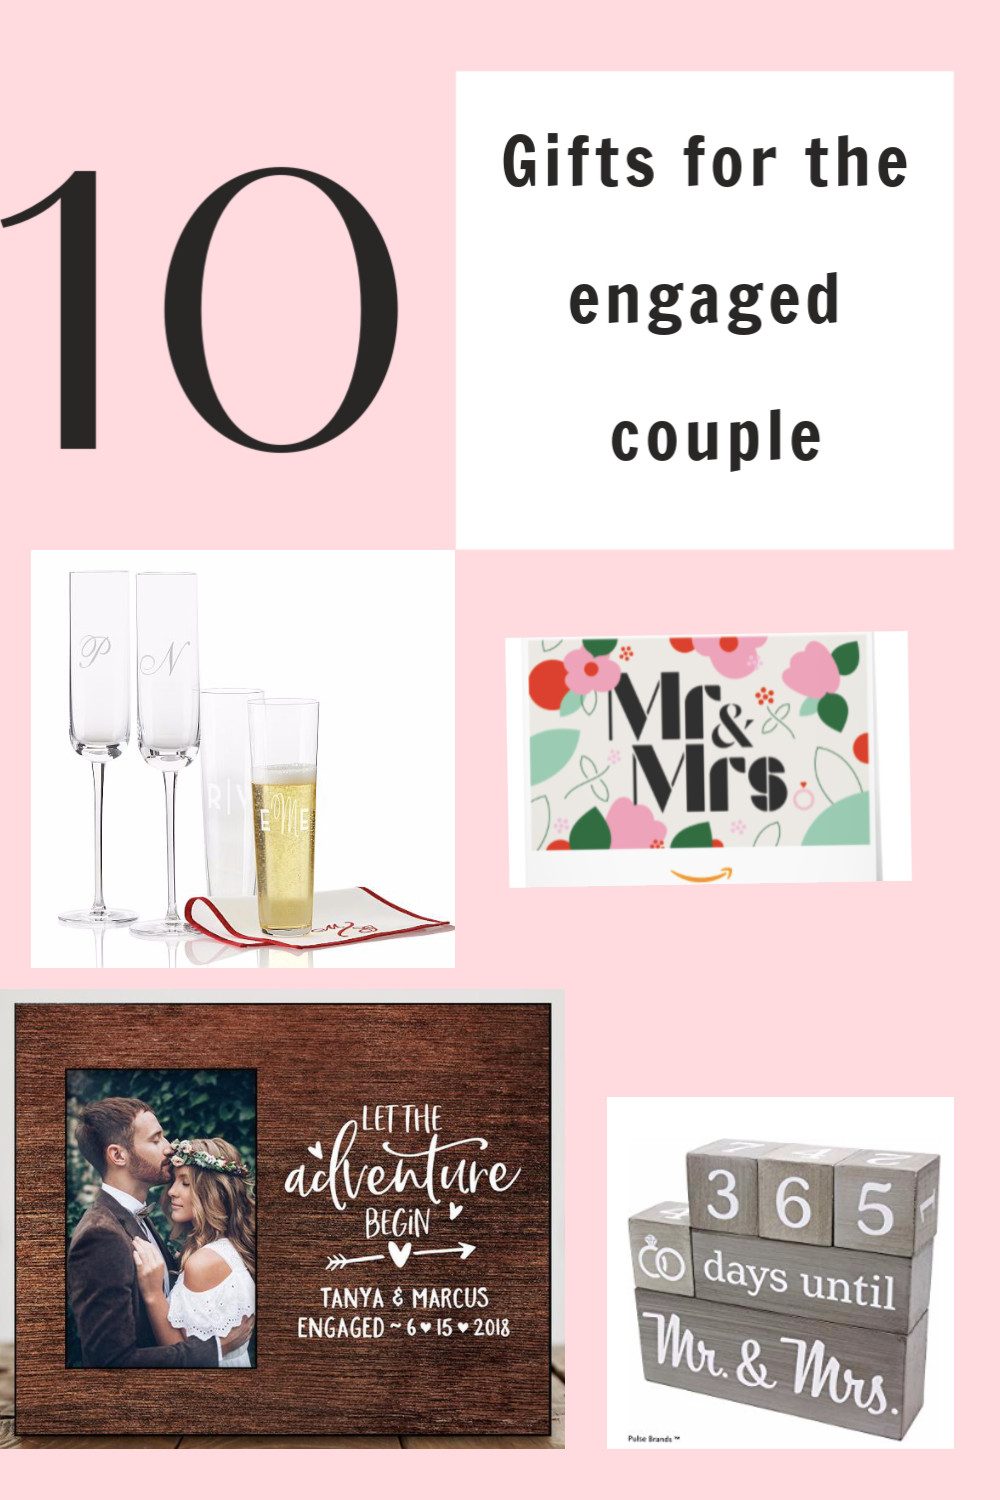 Gift Ideas For Engaged Couples
 10 Cute Gift Ideas for the Engaged Couple